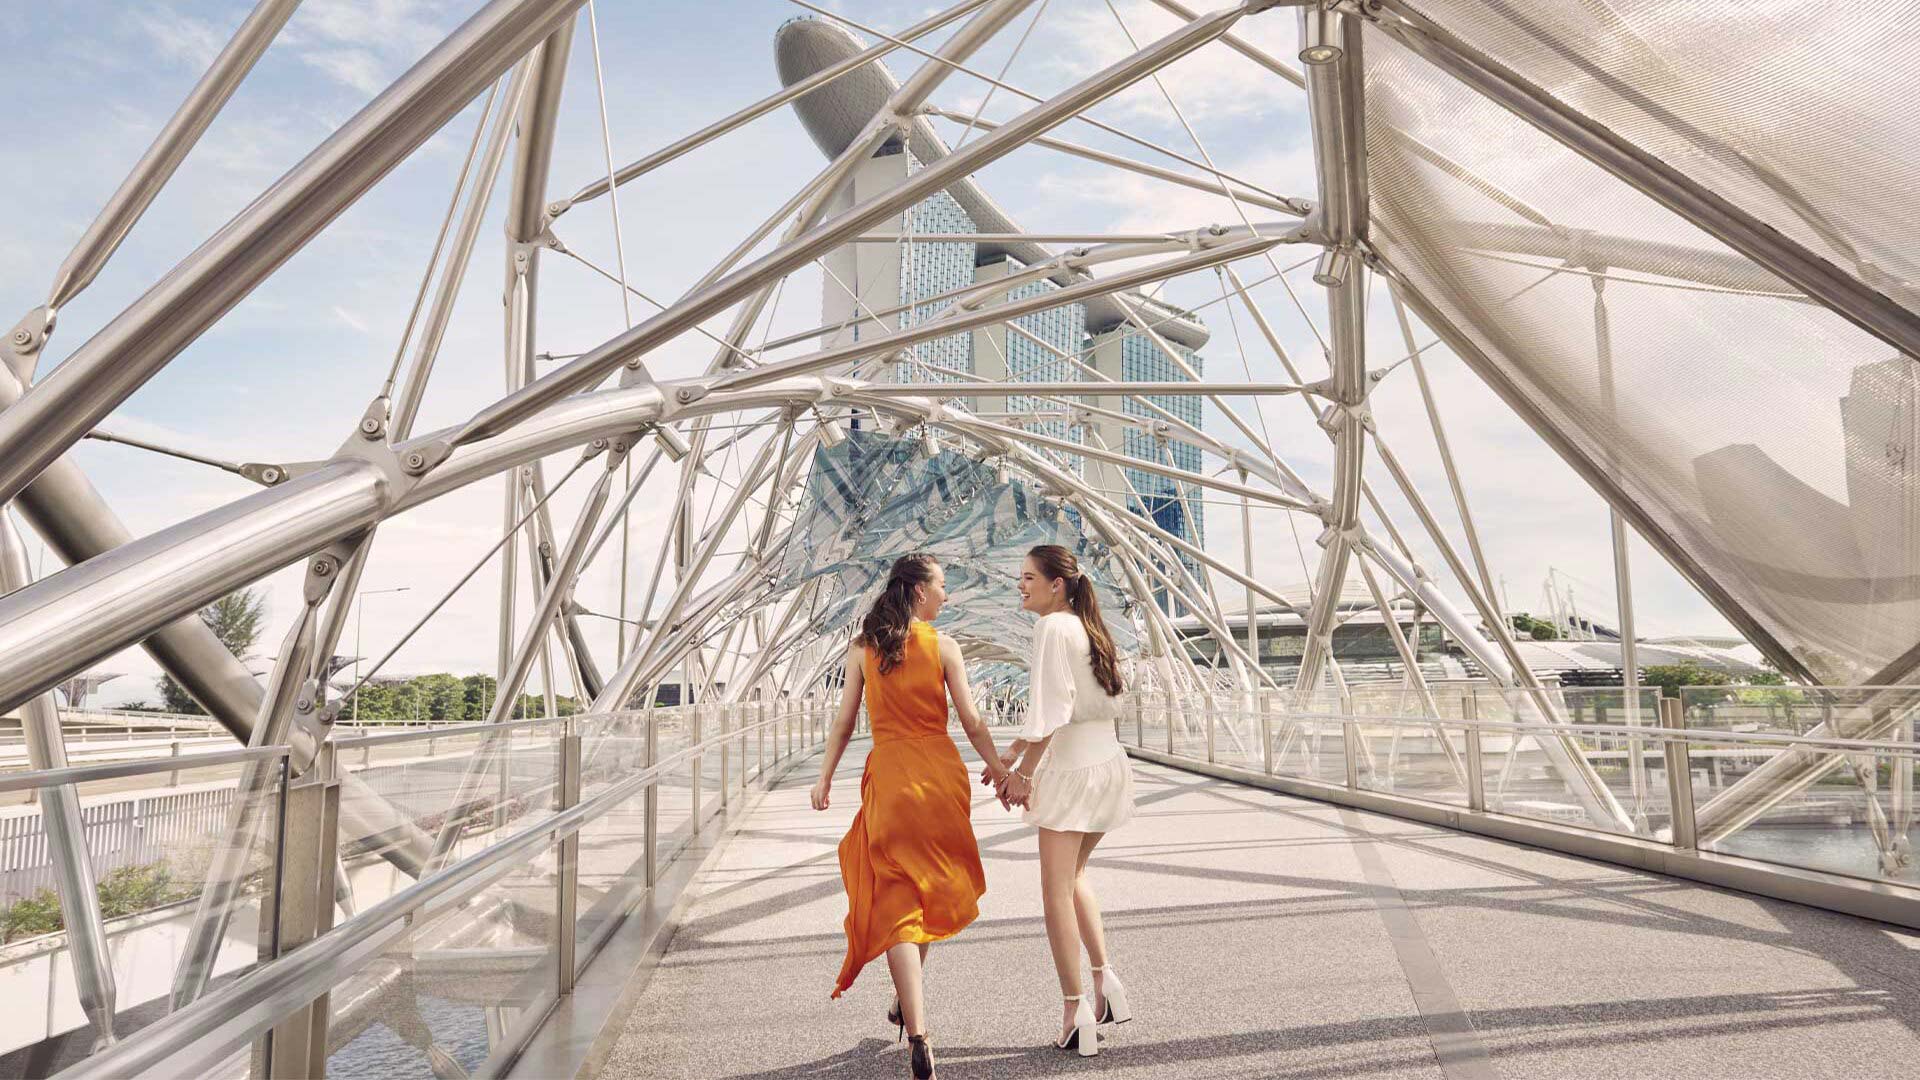 Two ladies visiting Marina Bay Sands after looking for parking rates information